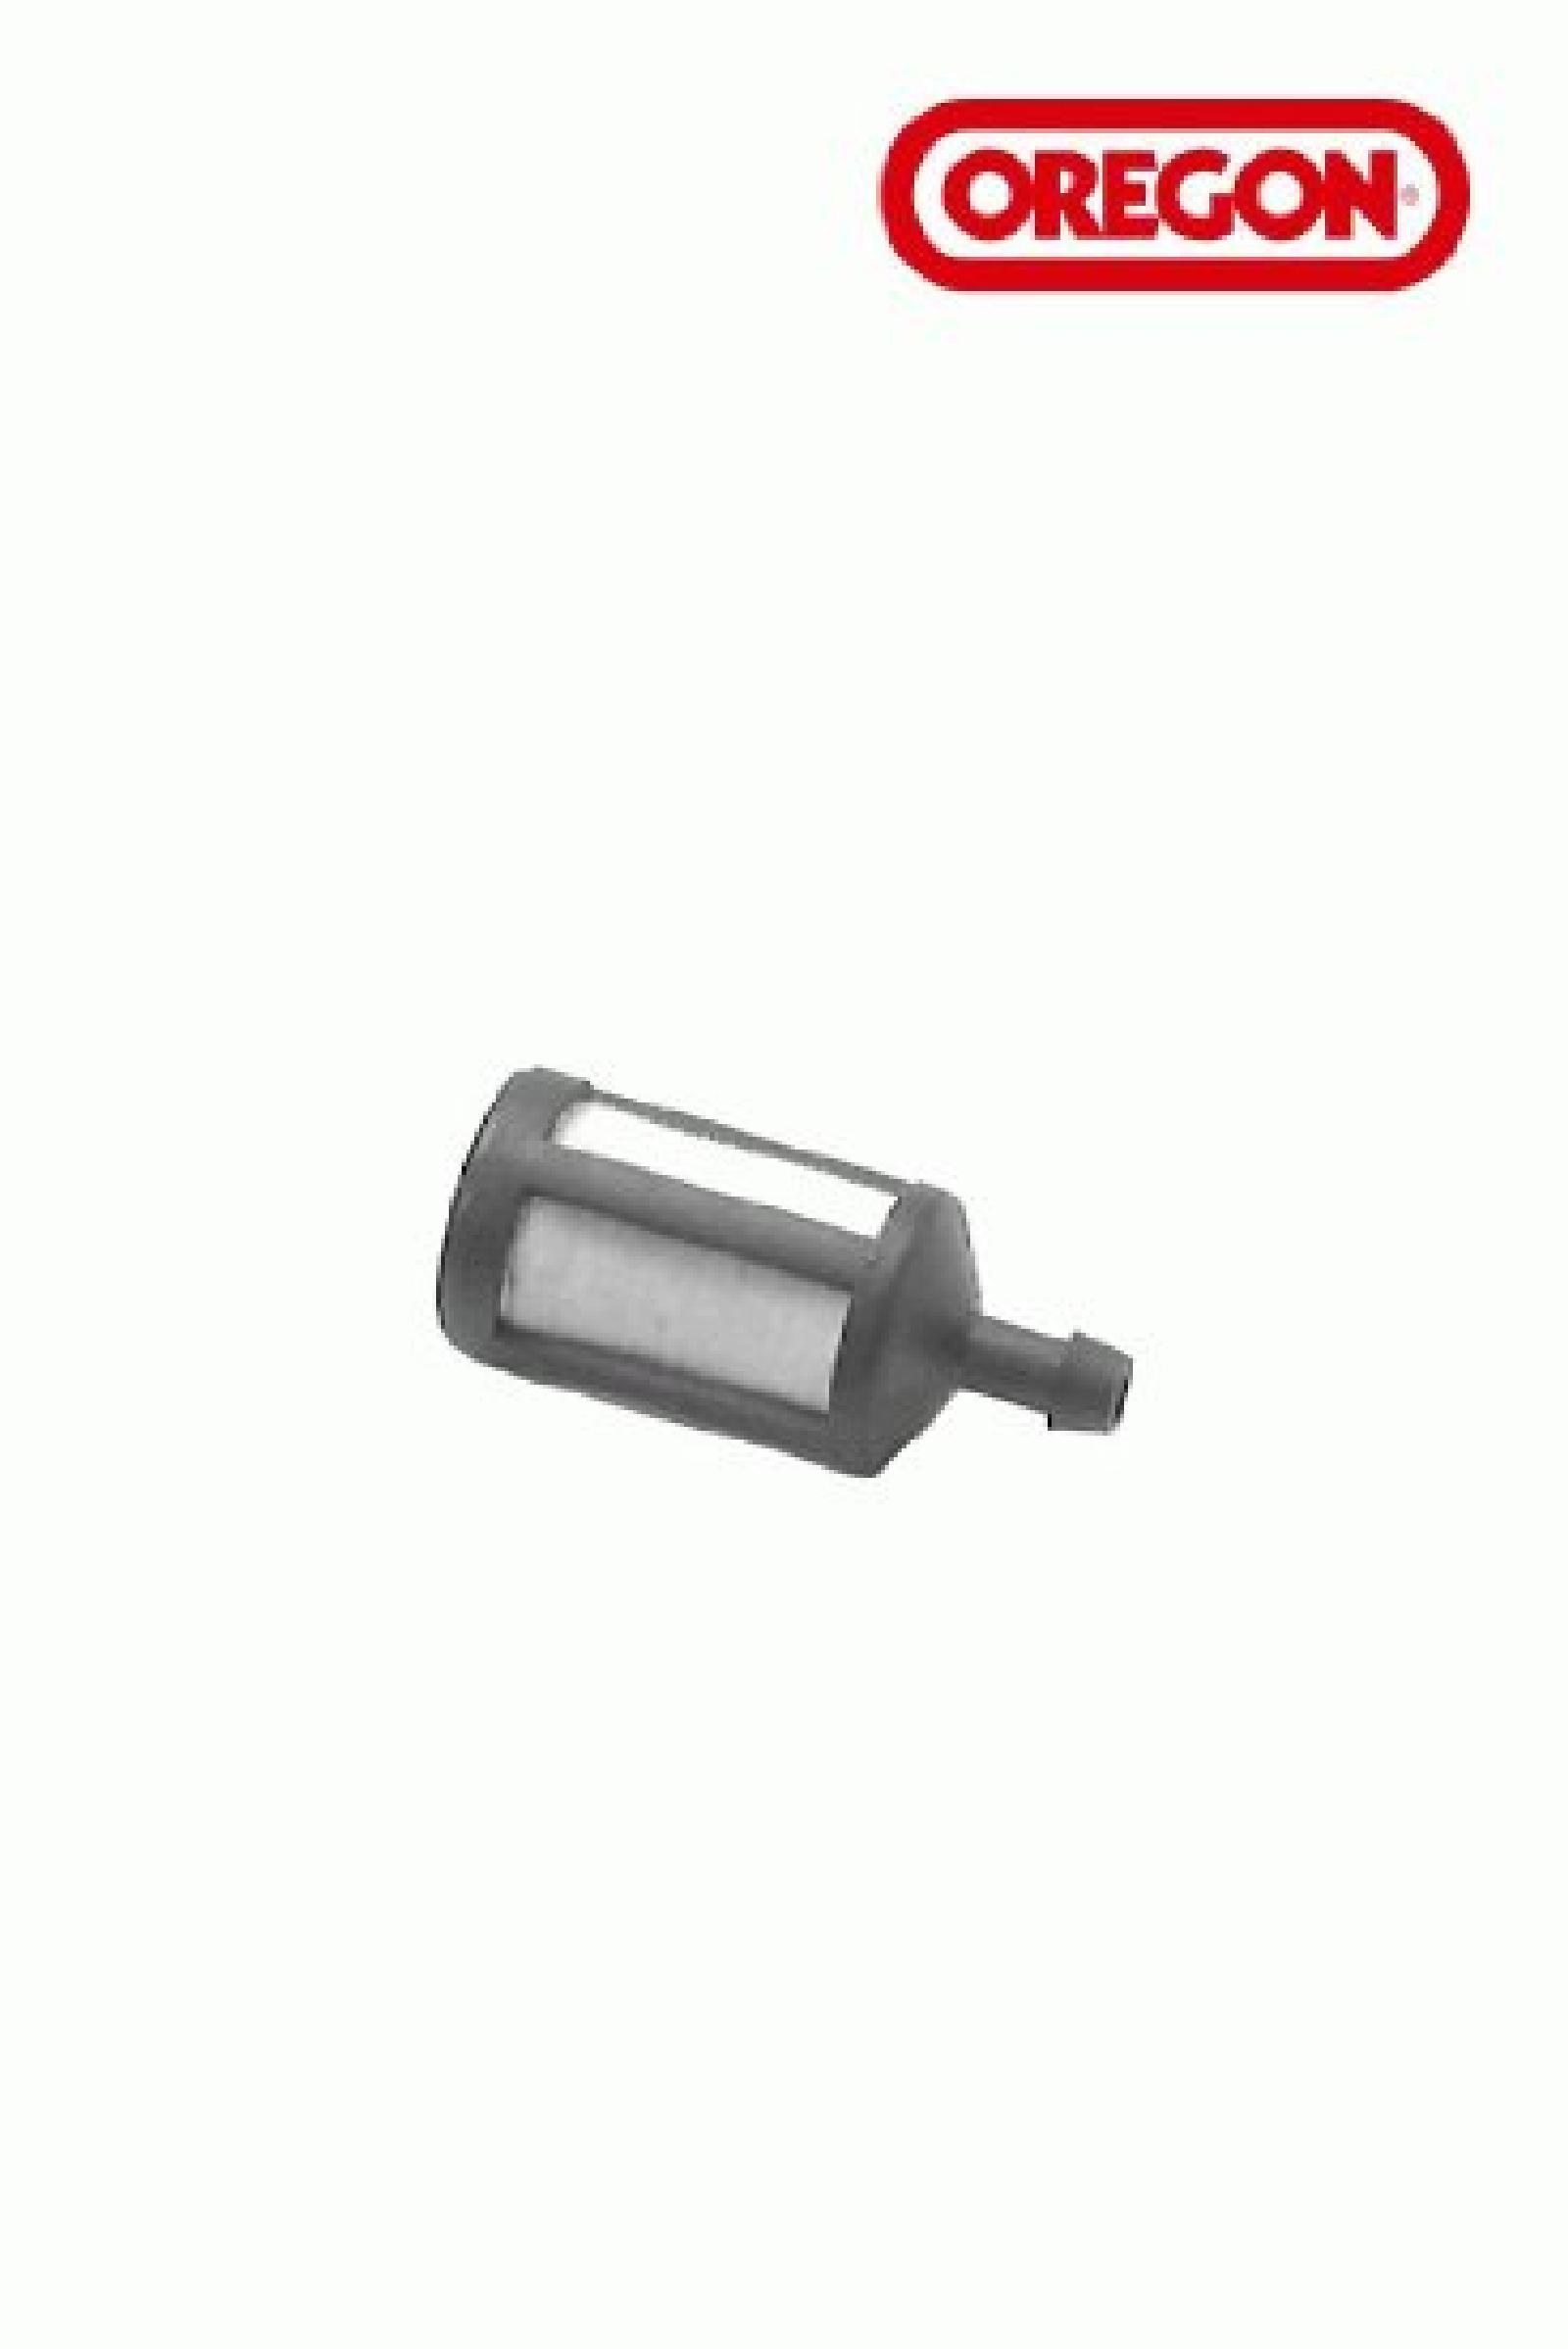 FUEL FILTER 3/16IN 175 MC part# 07-210 by Oregon - Click Image to Close